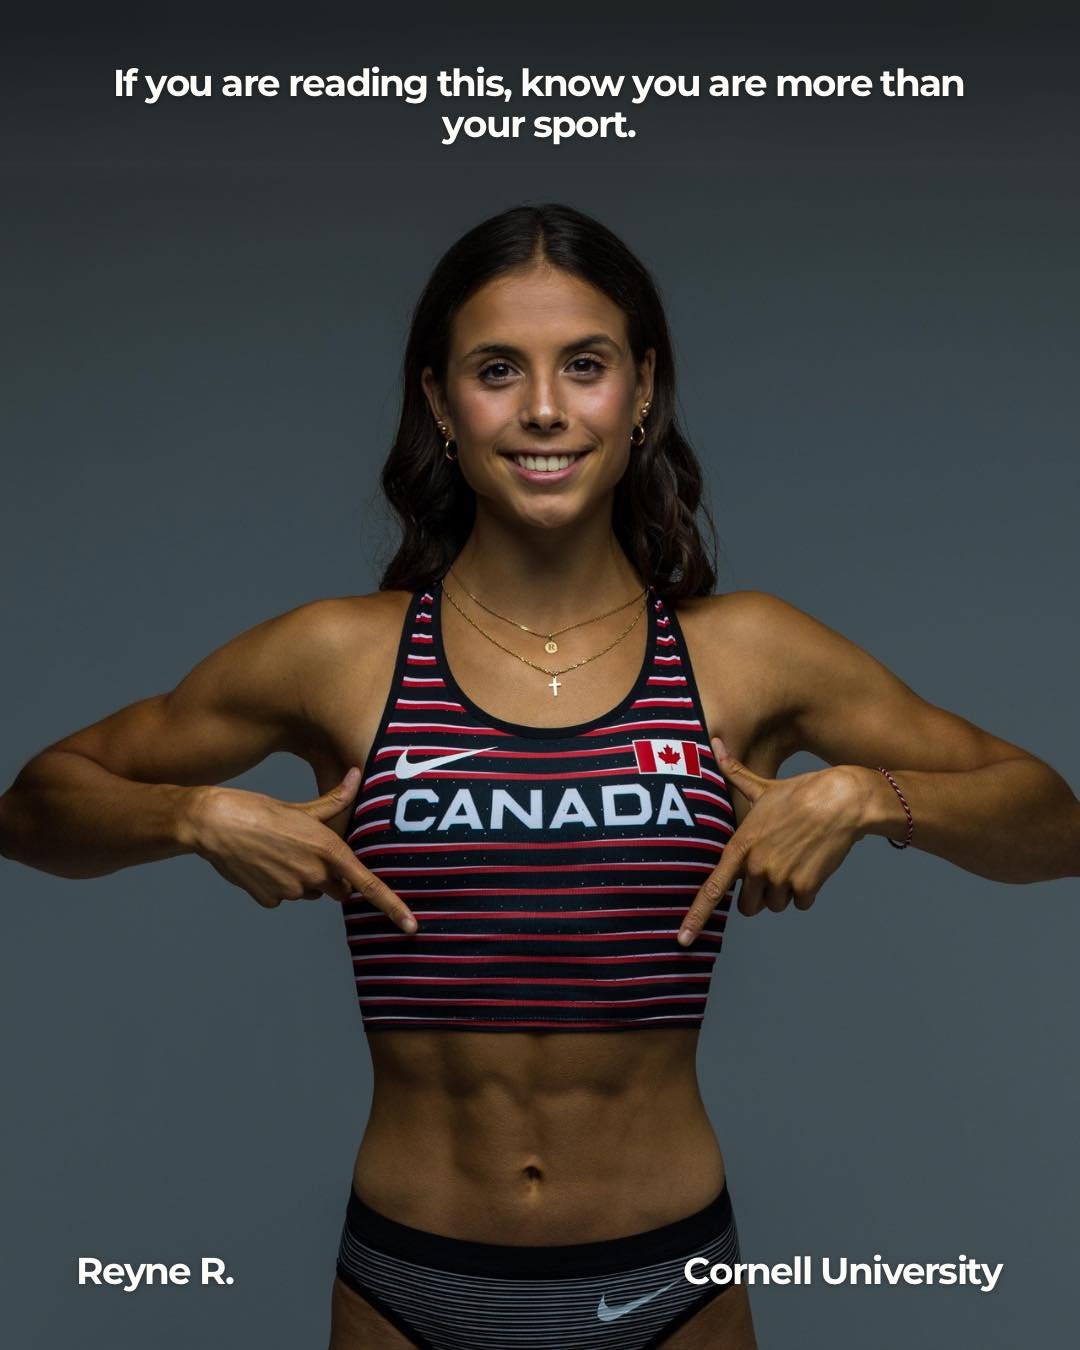 &quot;If you're reading this, know that you are more than you're sport; you are every action/emotion/thought that makes you, you.&quot; Reyne, a track a field athlete at Cornell Univeristy and Team Canada for the Pan American games, shares an inspira